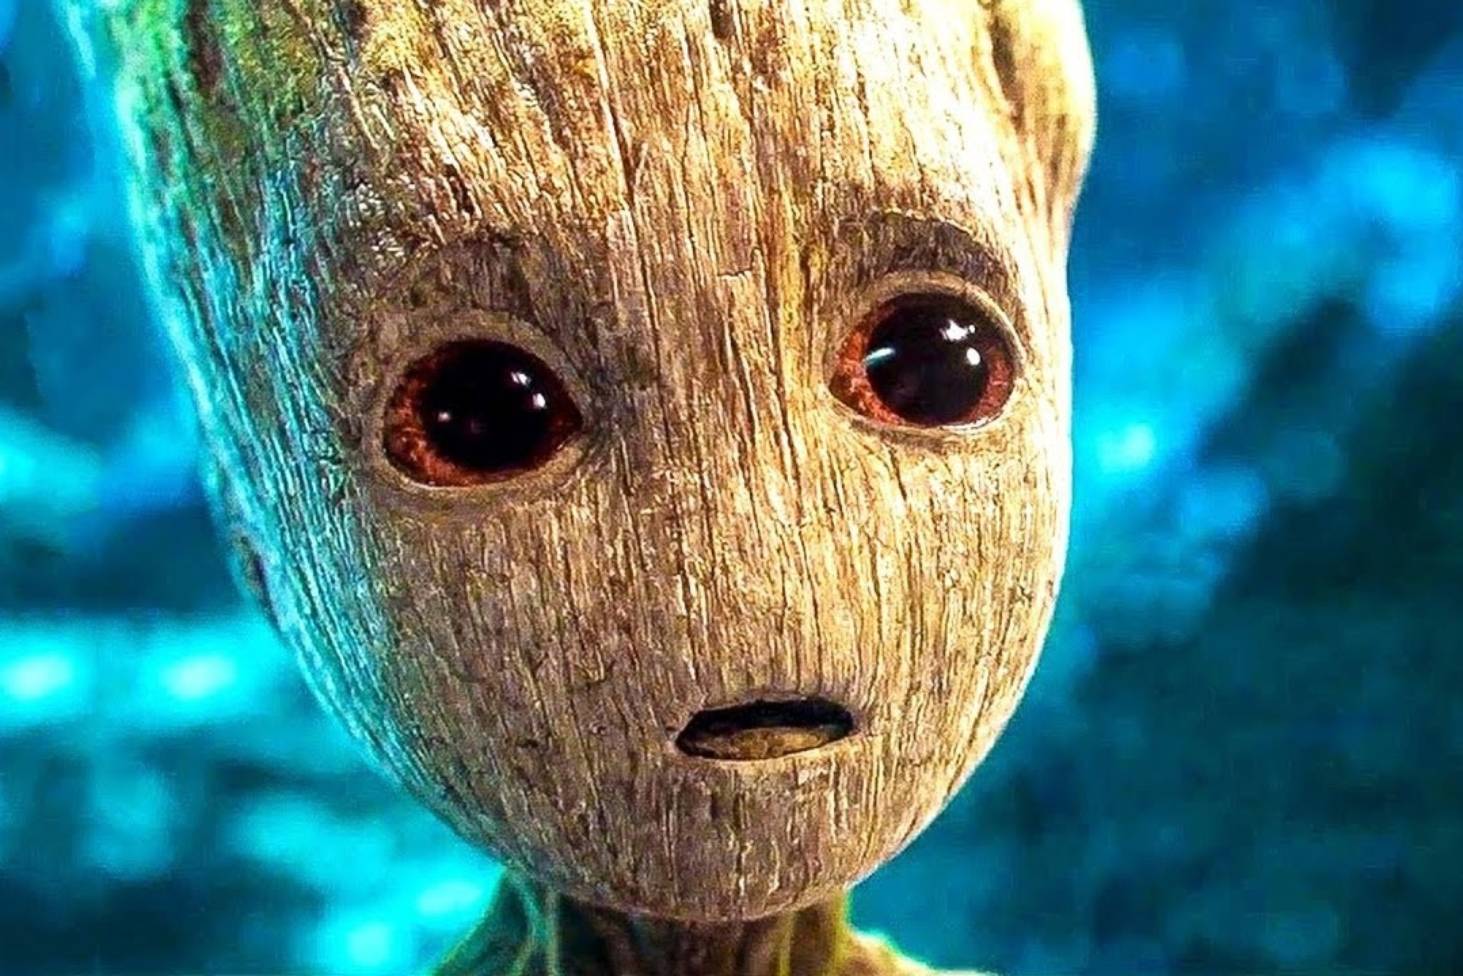 things you don't know about Baby Groot from Guardians